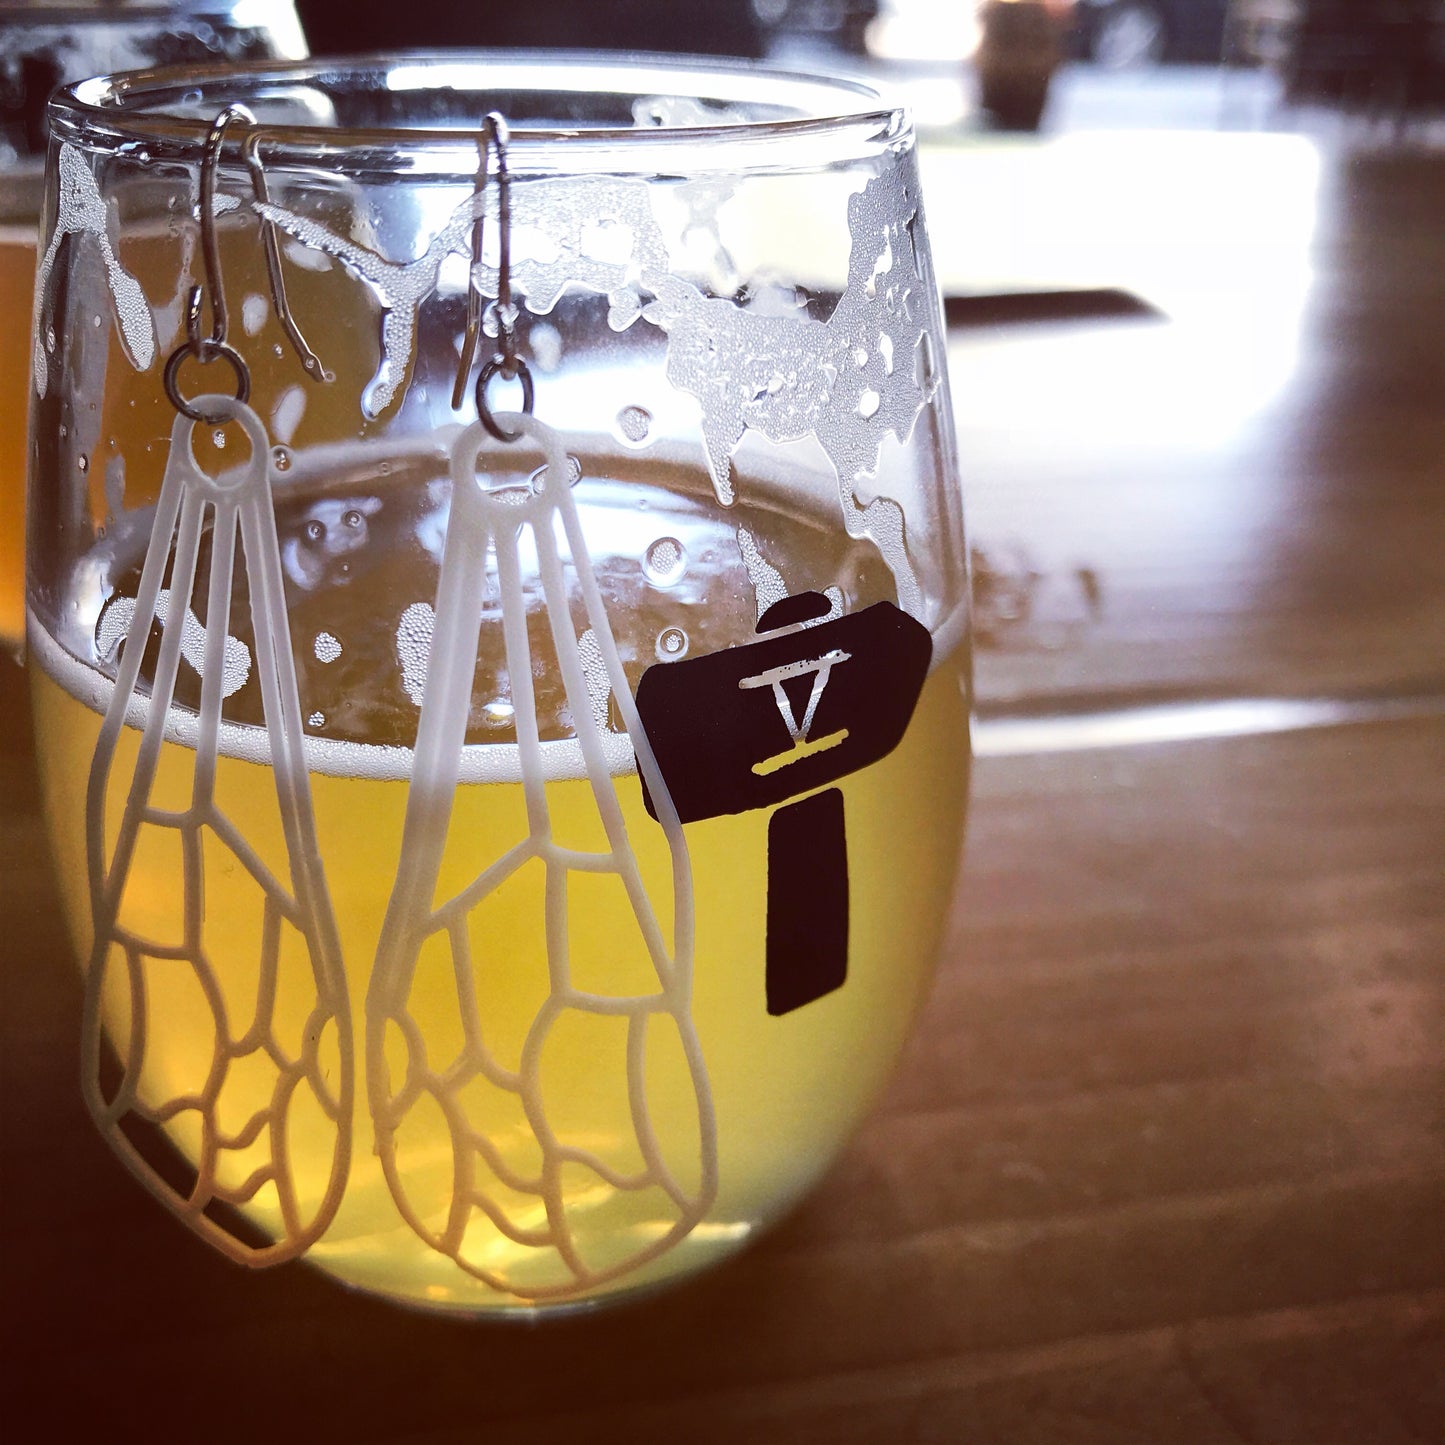 Hanging off of a small glass are two earrings that are shaped like dragonfly or insect wings. They are white and show all of the wing's veins. The glass has the logo of Fifth Hammer Brewery and is half full with a golden colored beer. 